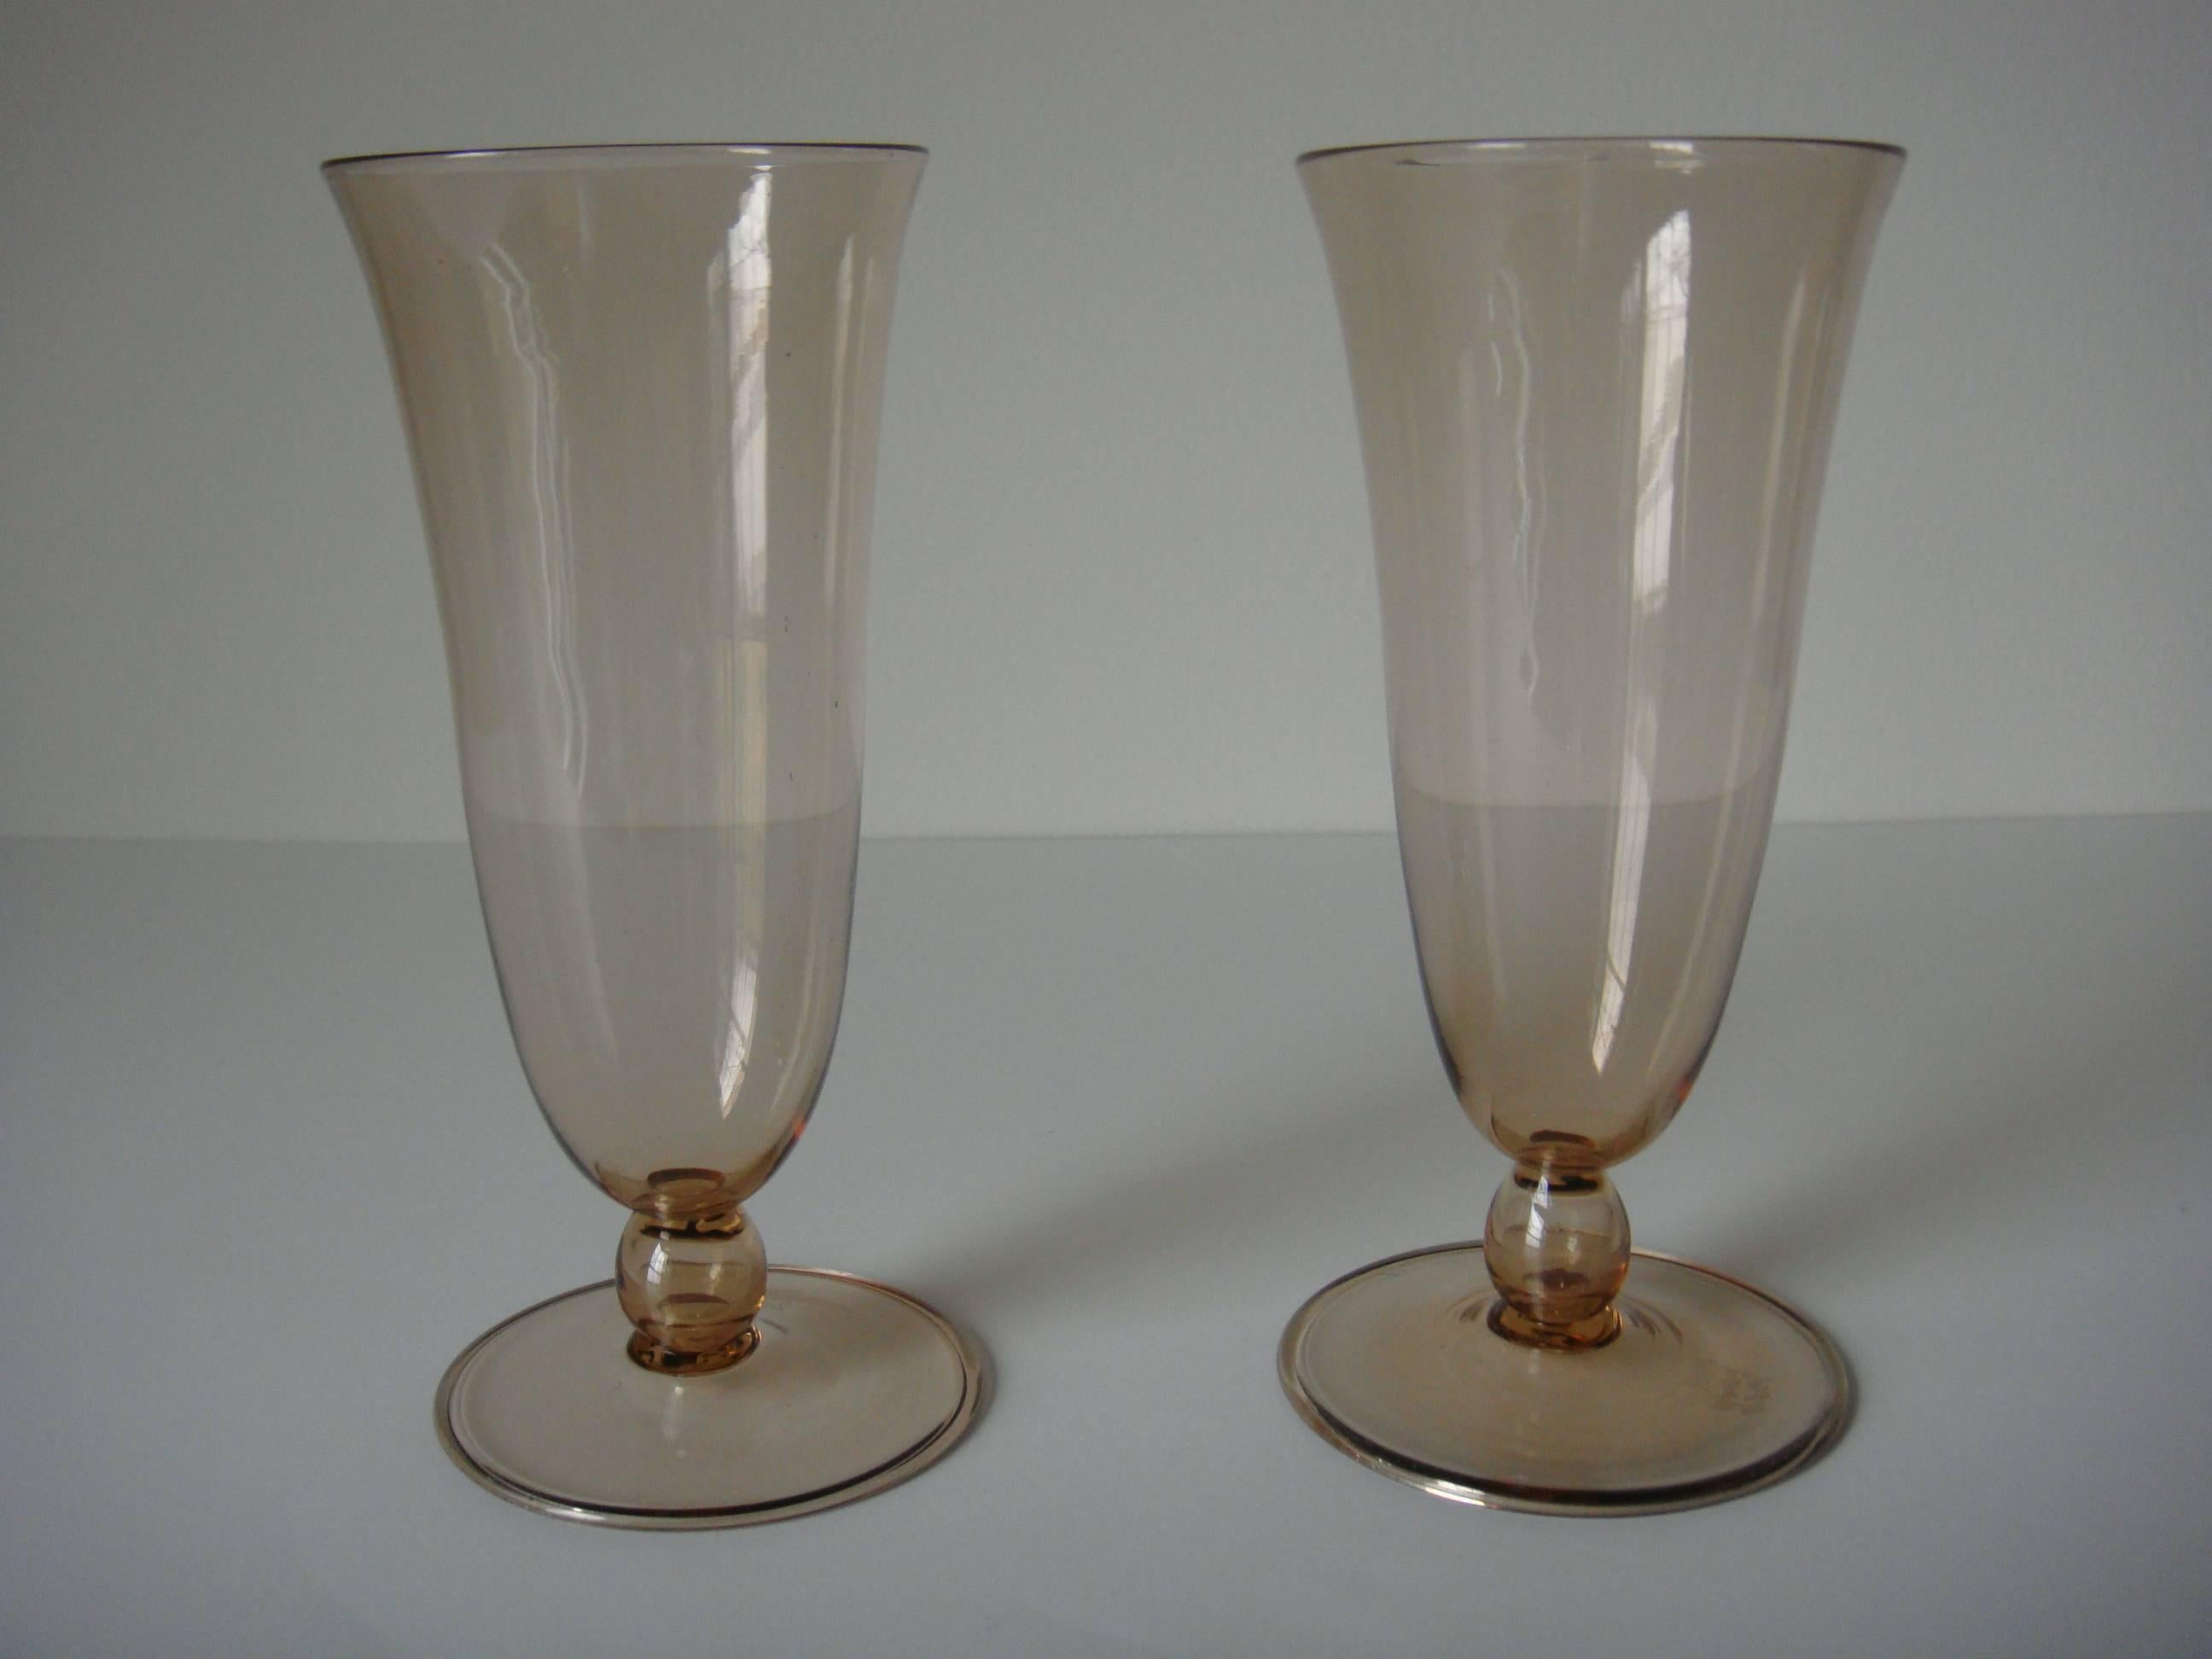 Matched pair of Vittorio Zecchin MVM Cappellin Murano vases, circa 1927. Elegant and minimal design by Zecchin with hollow stem, feather weight and fully signed acid etched mark! Perfect condition!